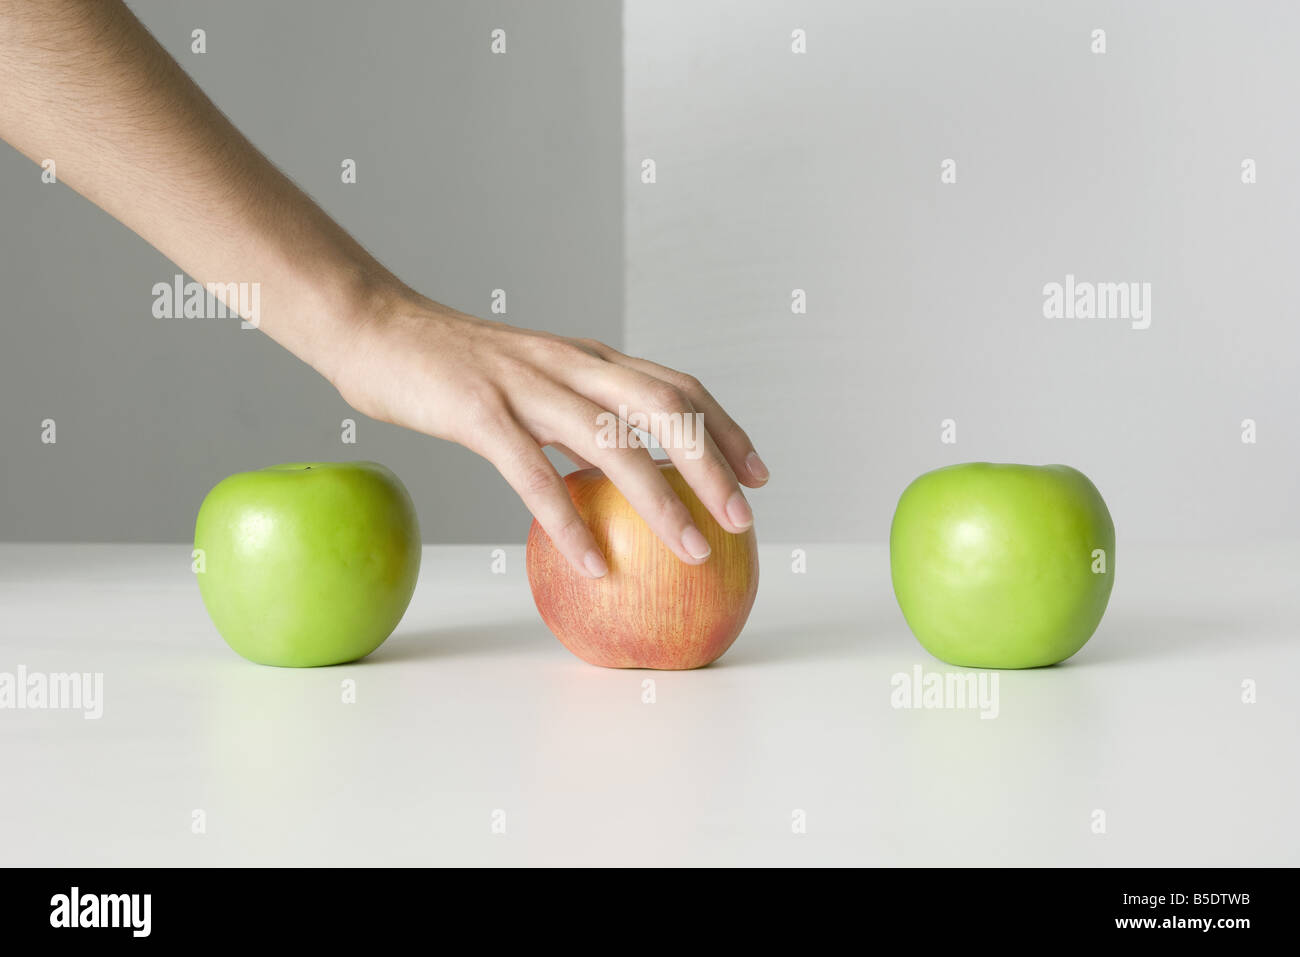 Three apples, hand selecting red apple Stock Photo